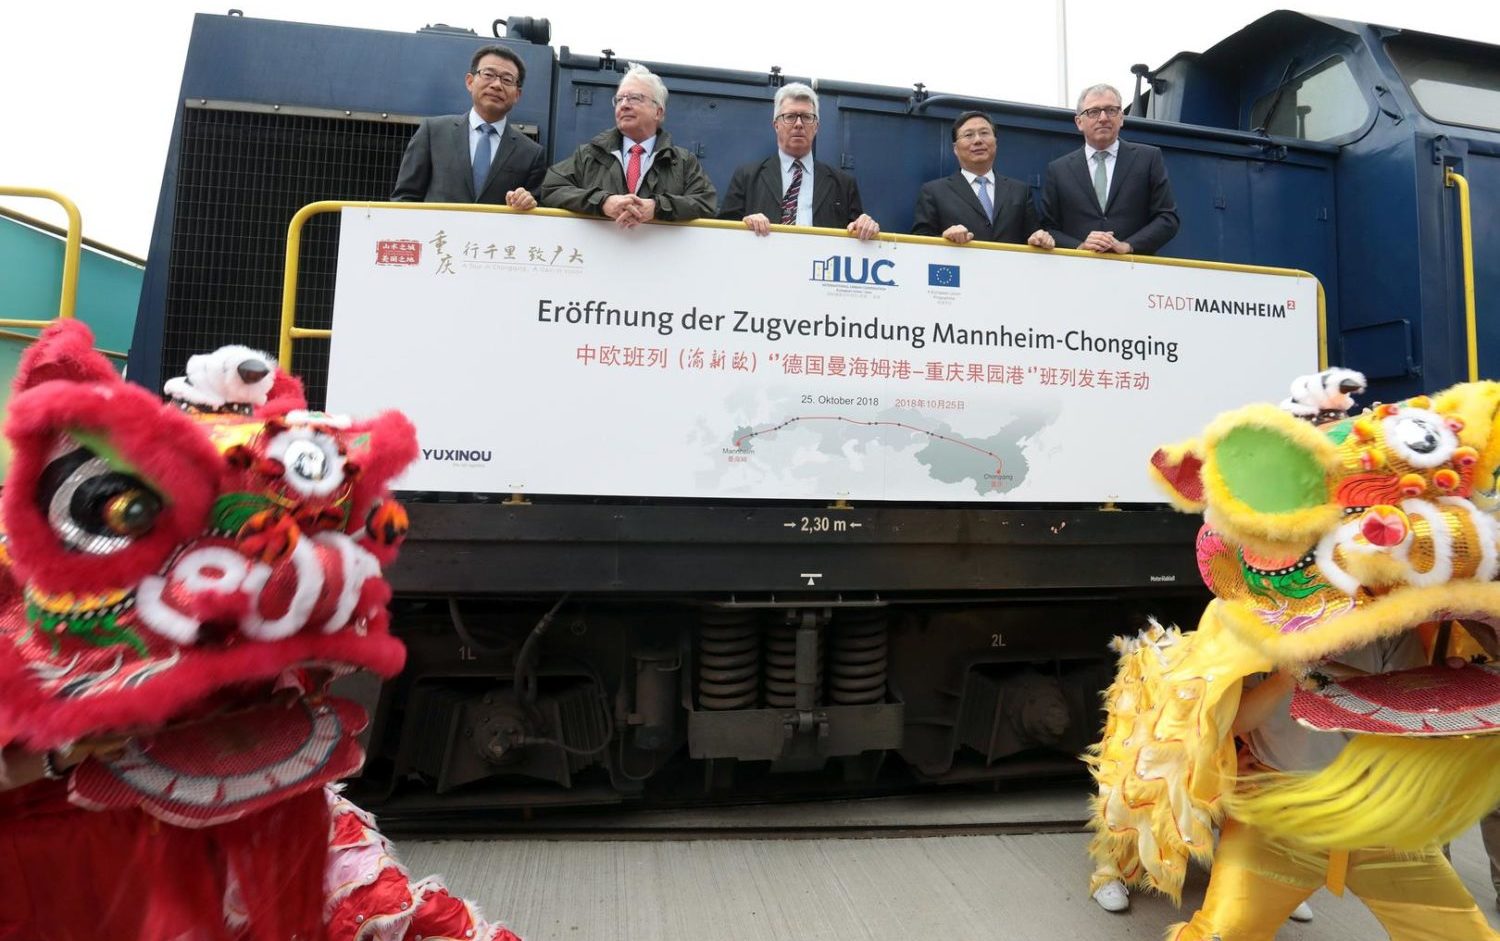 EU’s IUC Pilot Project Started: Cargo Railway Connection between Mannheim and Chongqing